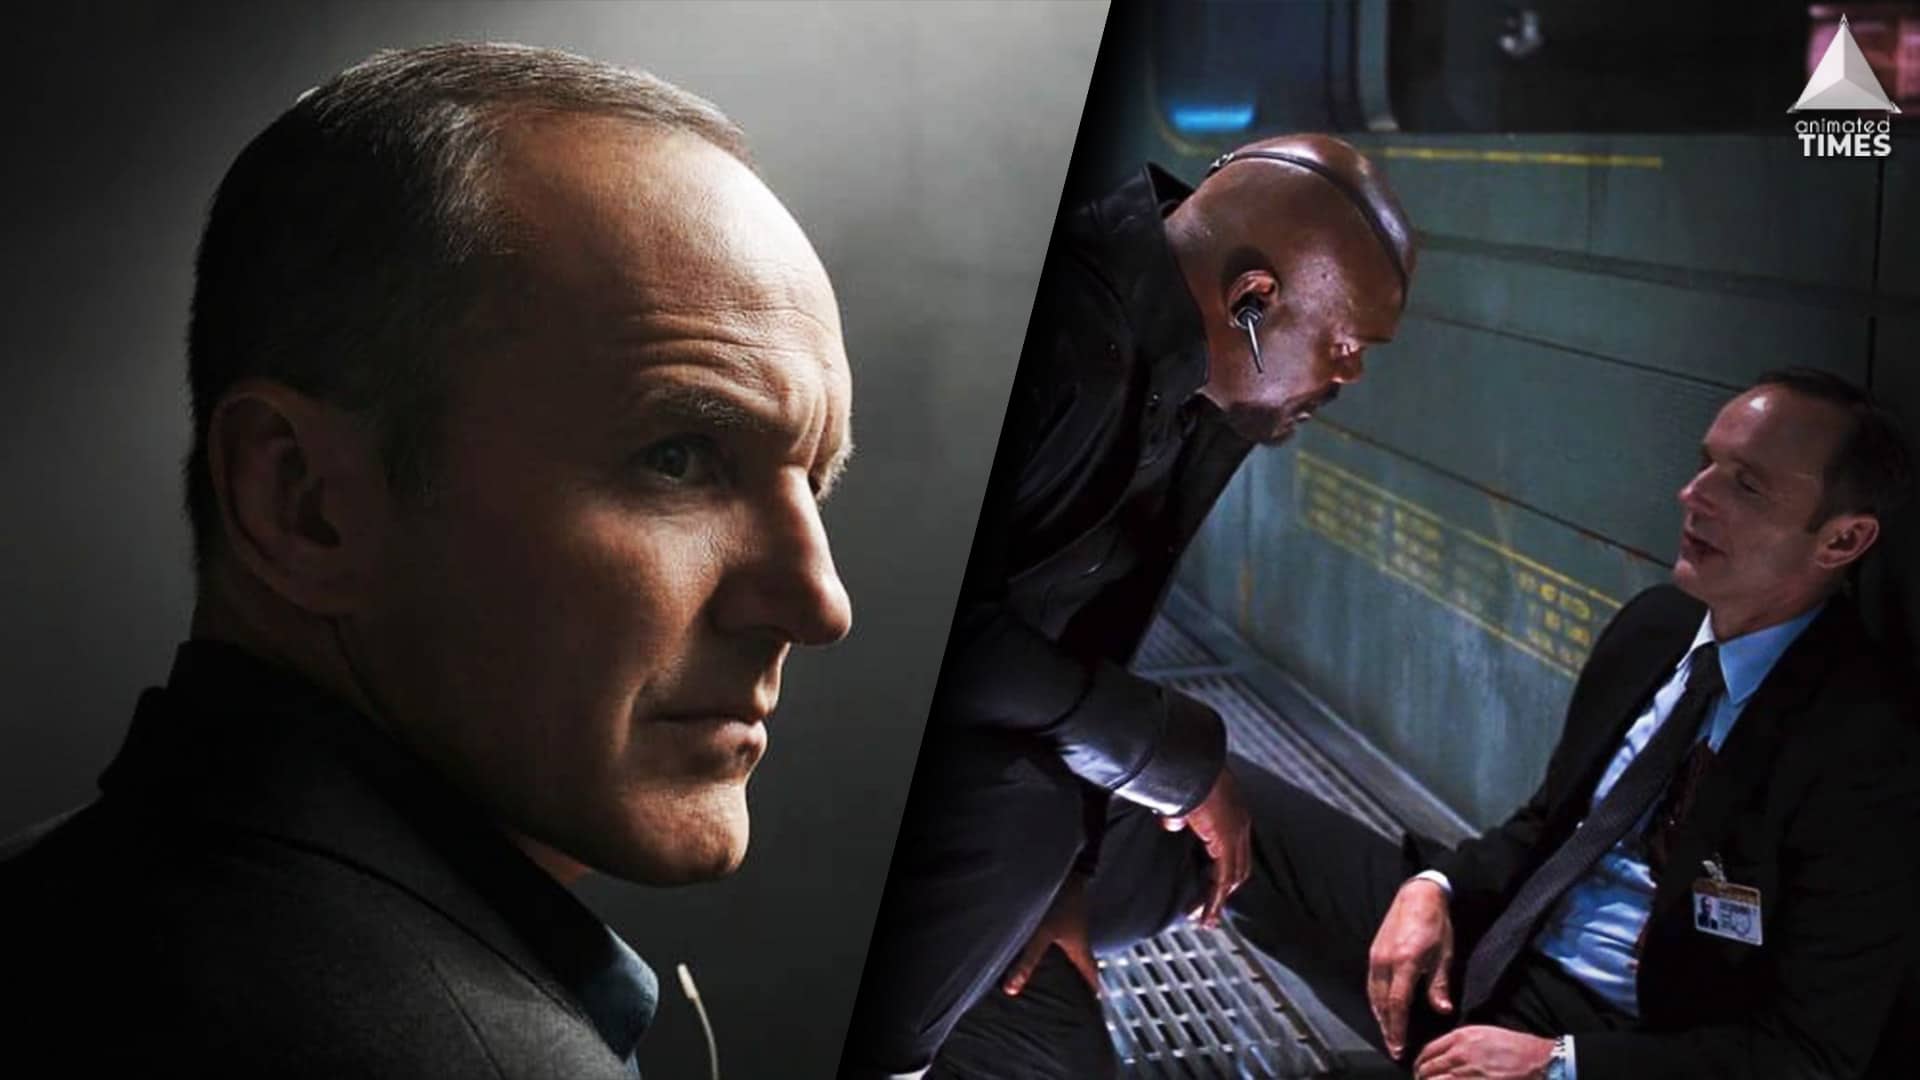 Agents of SHIELD Ends With Major Endgame Plot Hole in MCU?